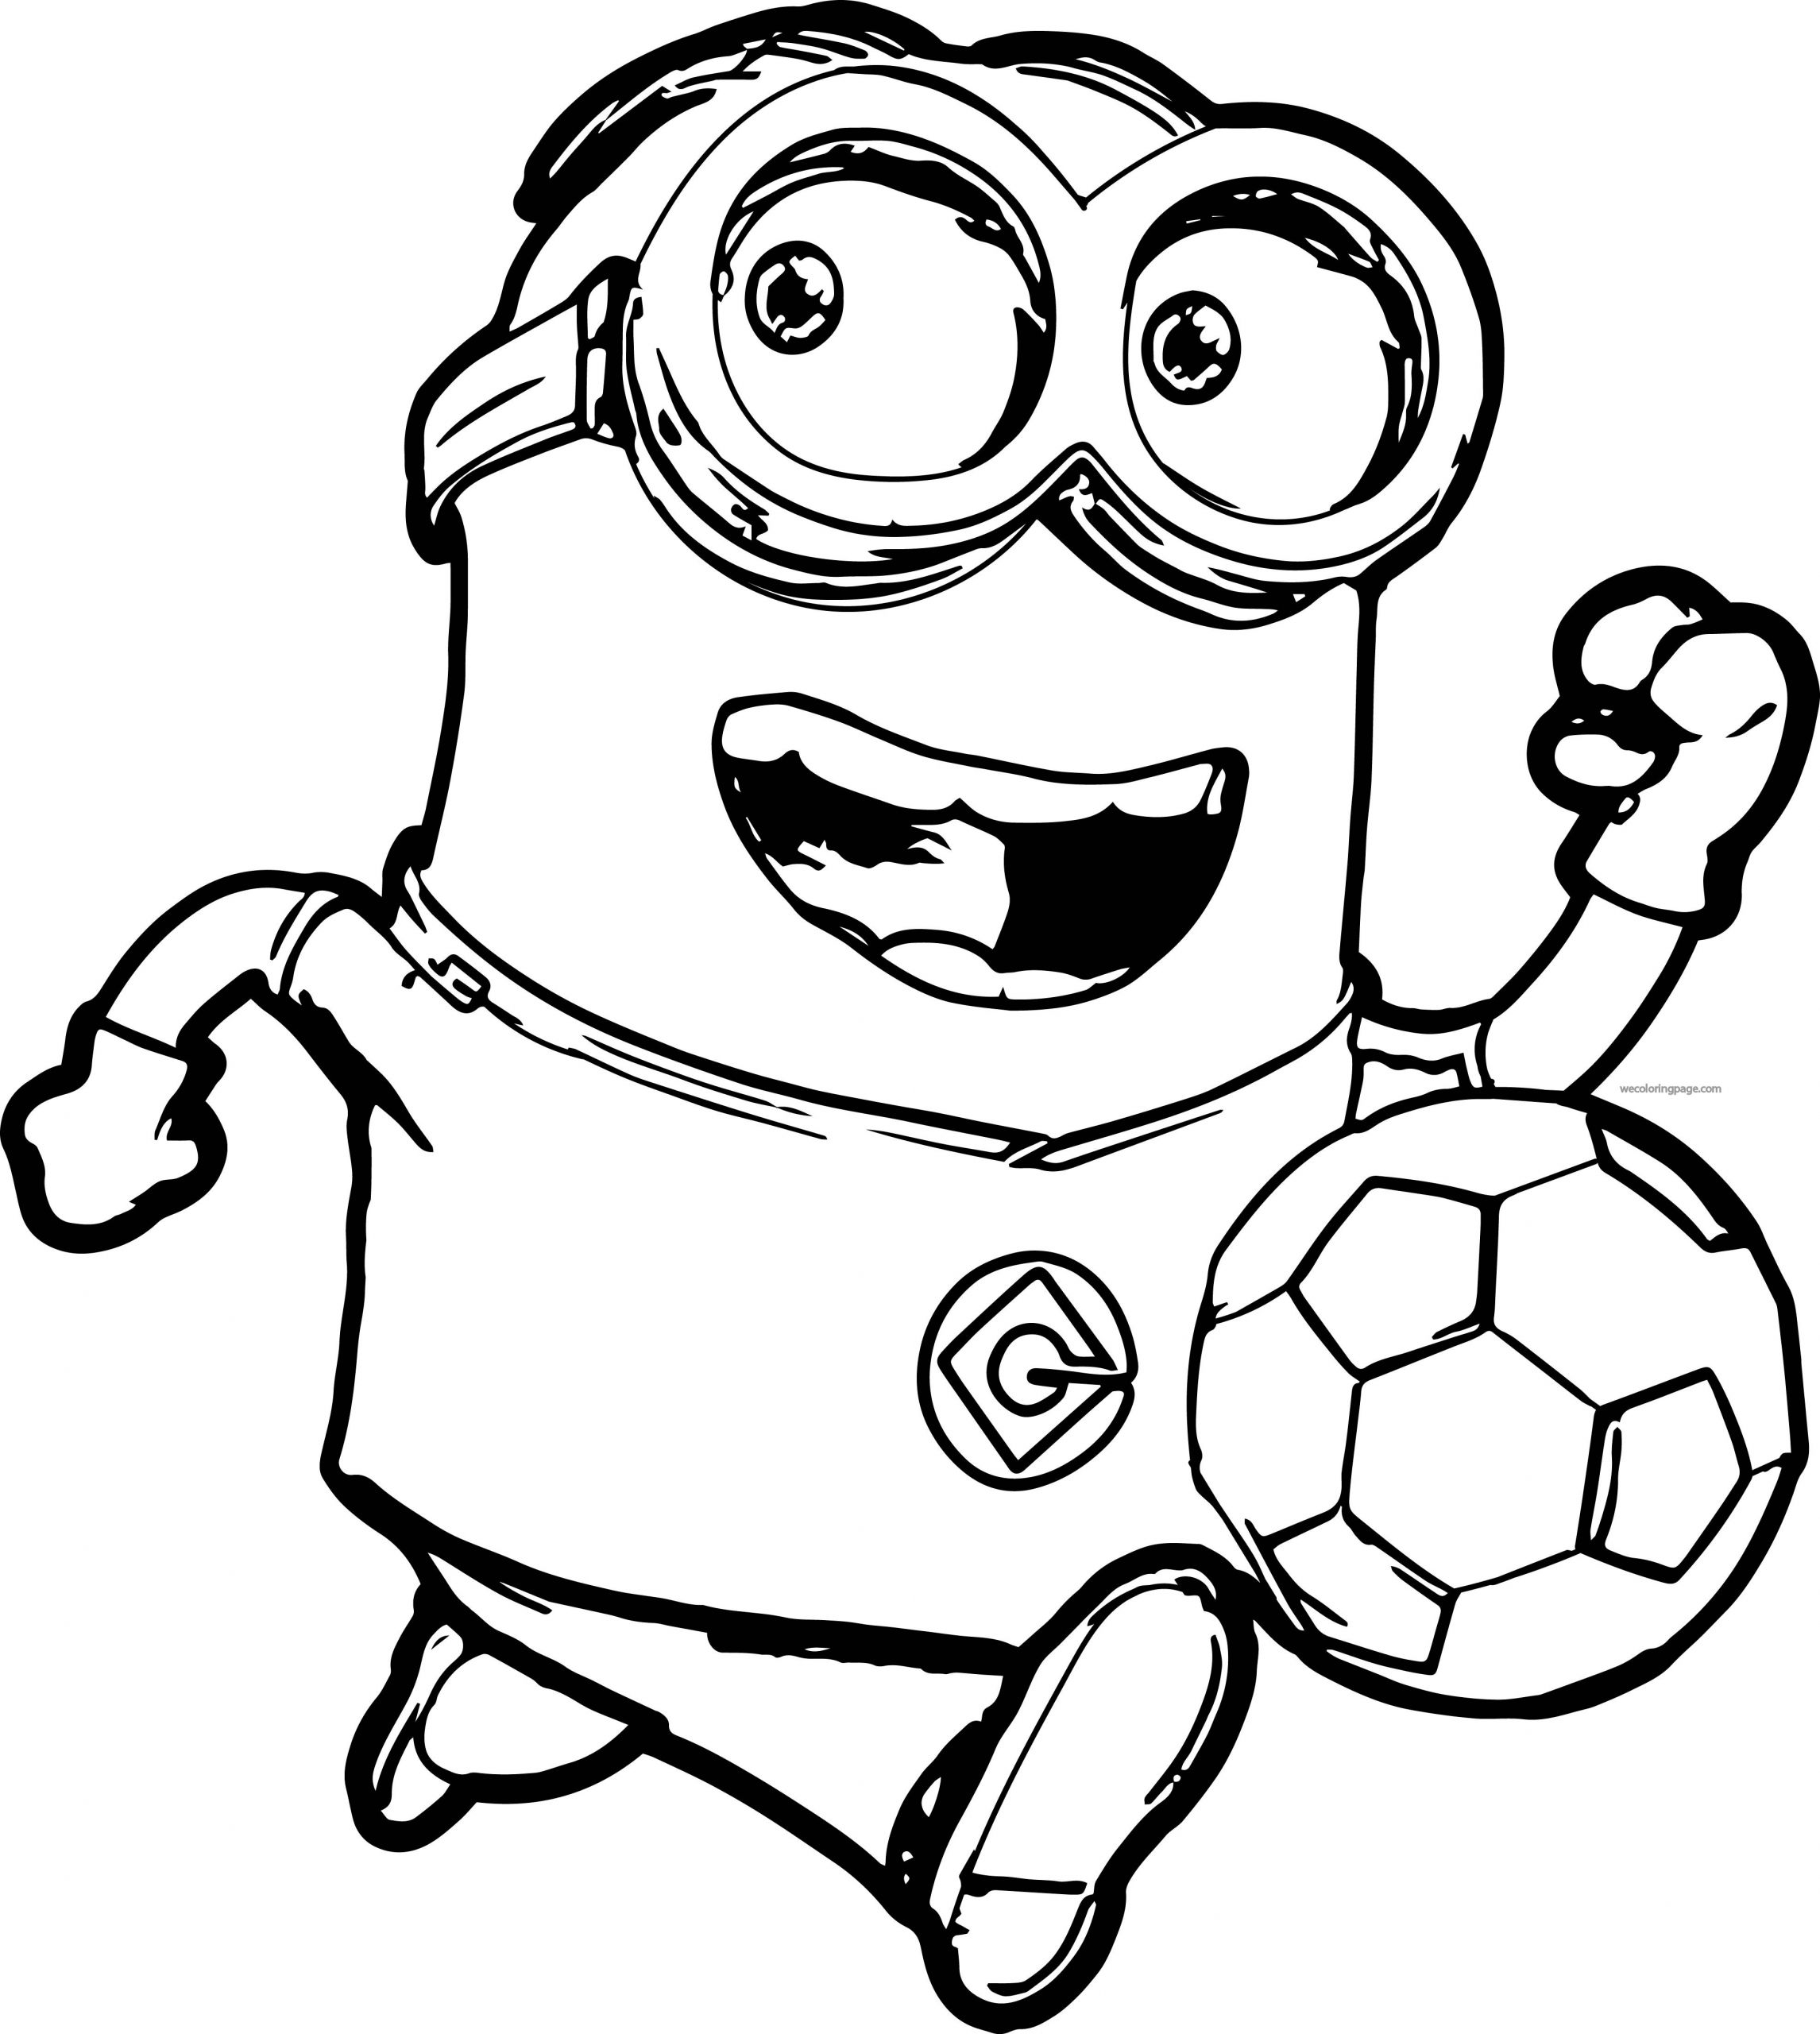 Coloring Pages For Kids Minions
 Minion Coloring Pages Best Coloring Pages For Kids